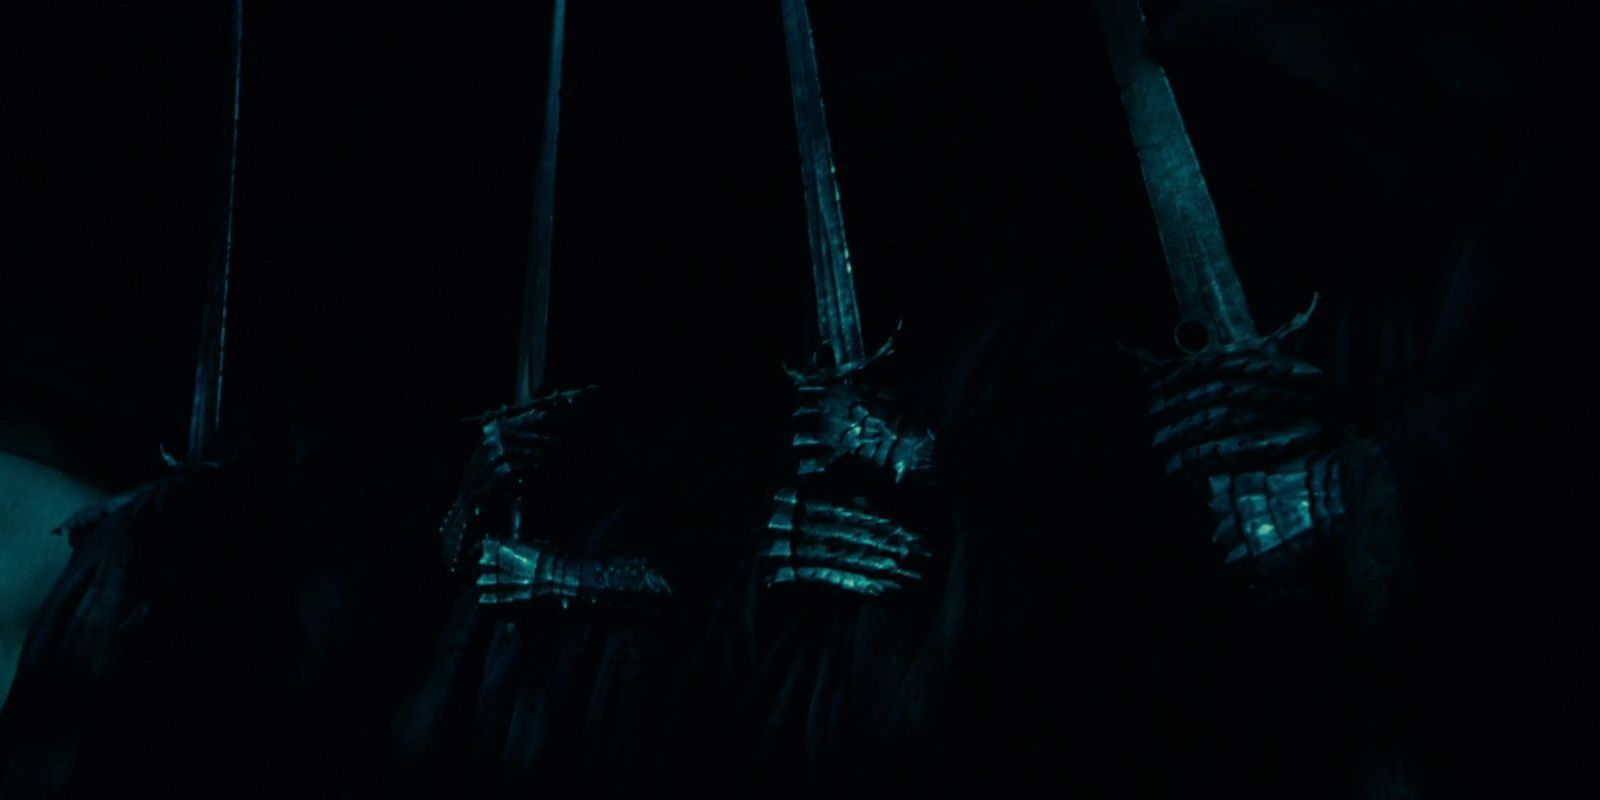 The Nazgul in the Lord of the Rings